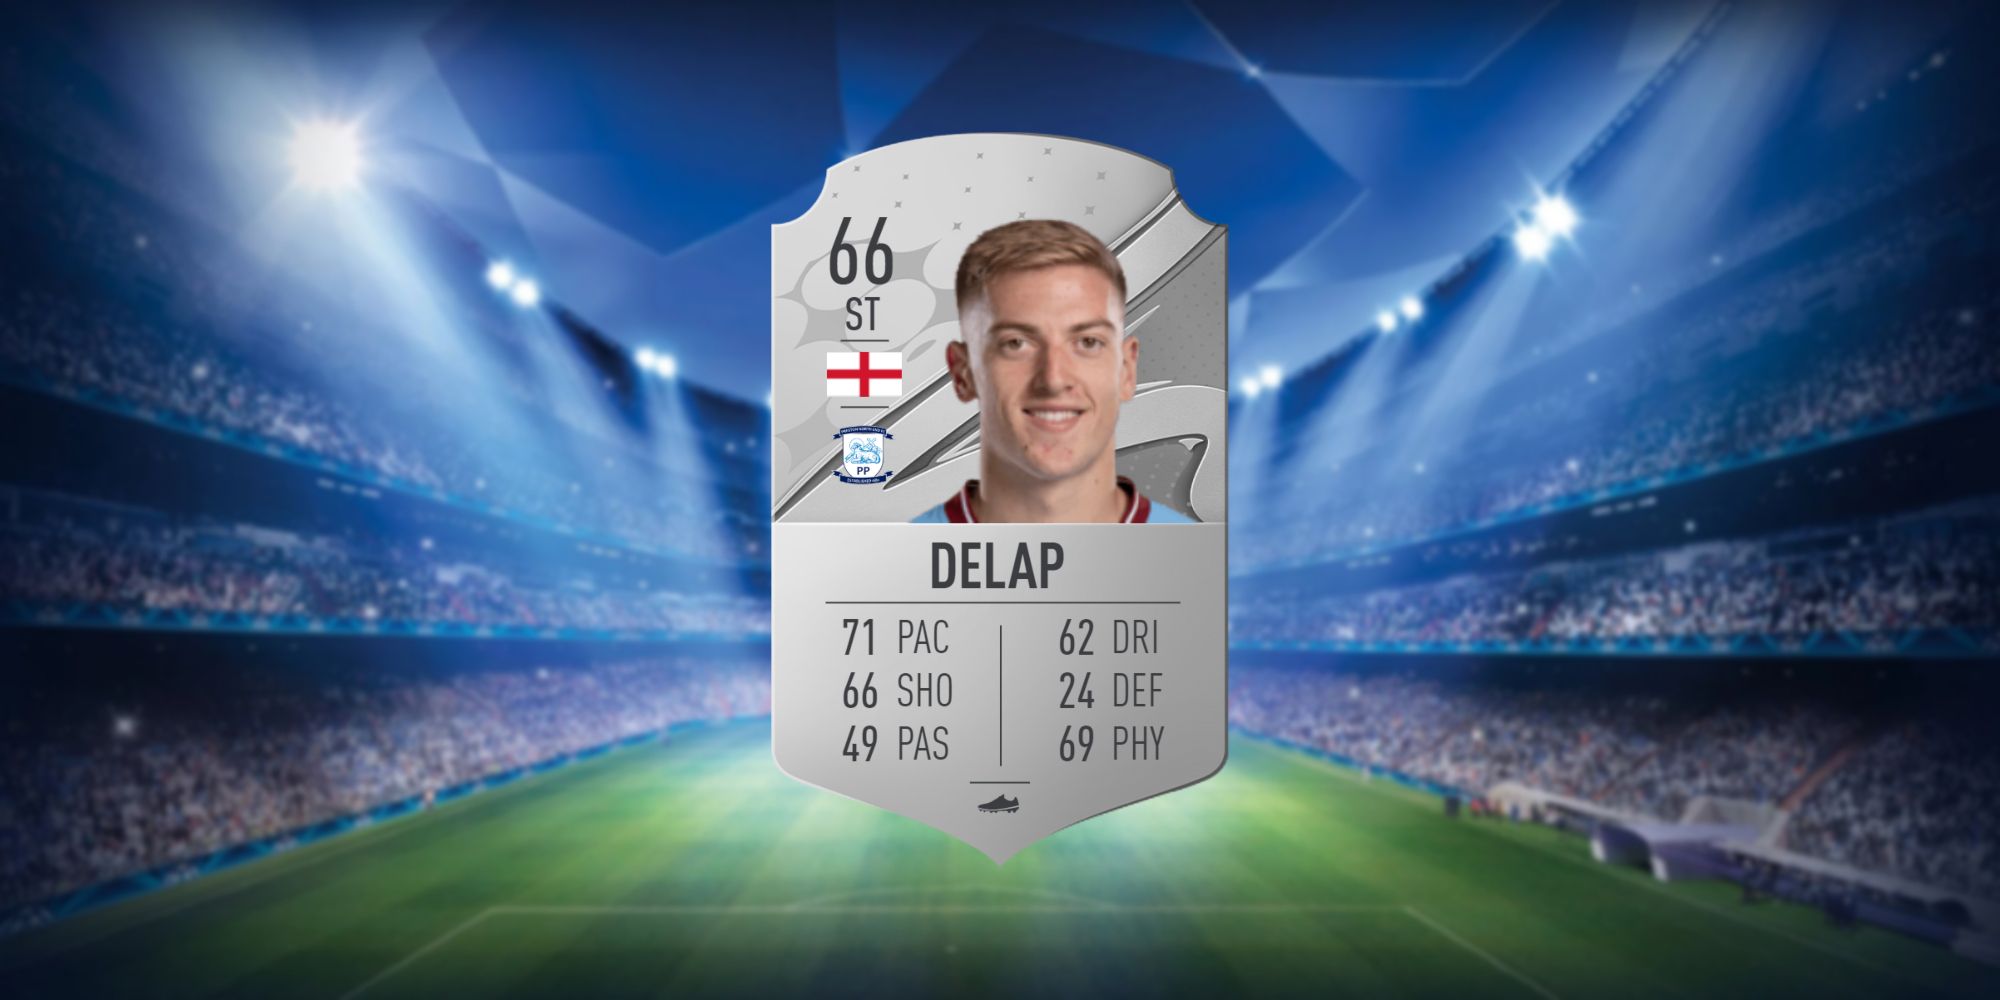 An image of Liam Delap's FIFA 23 Card